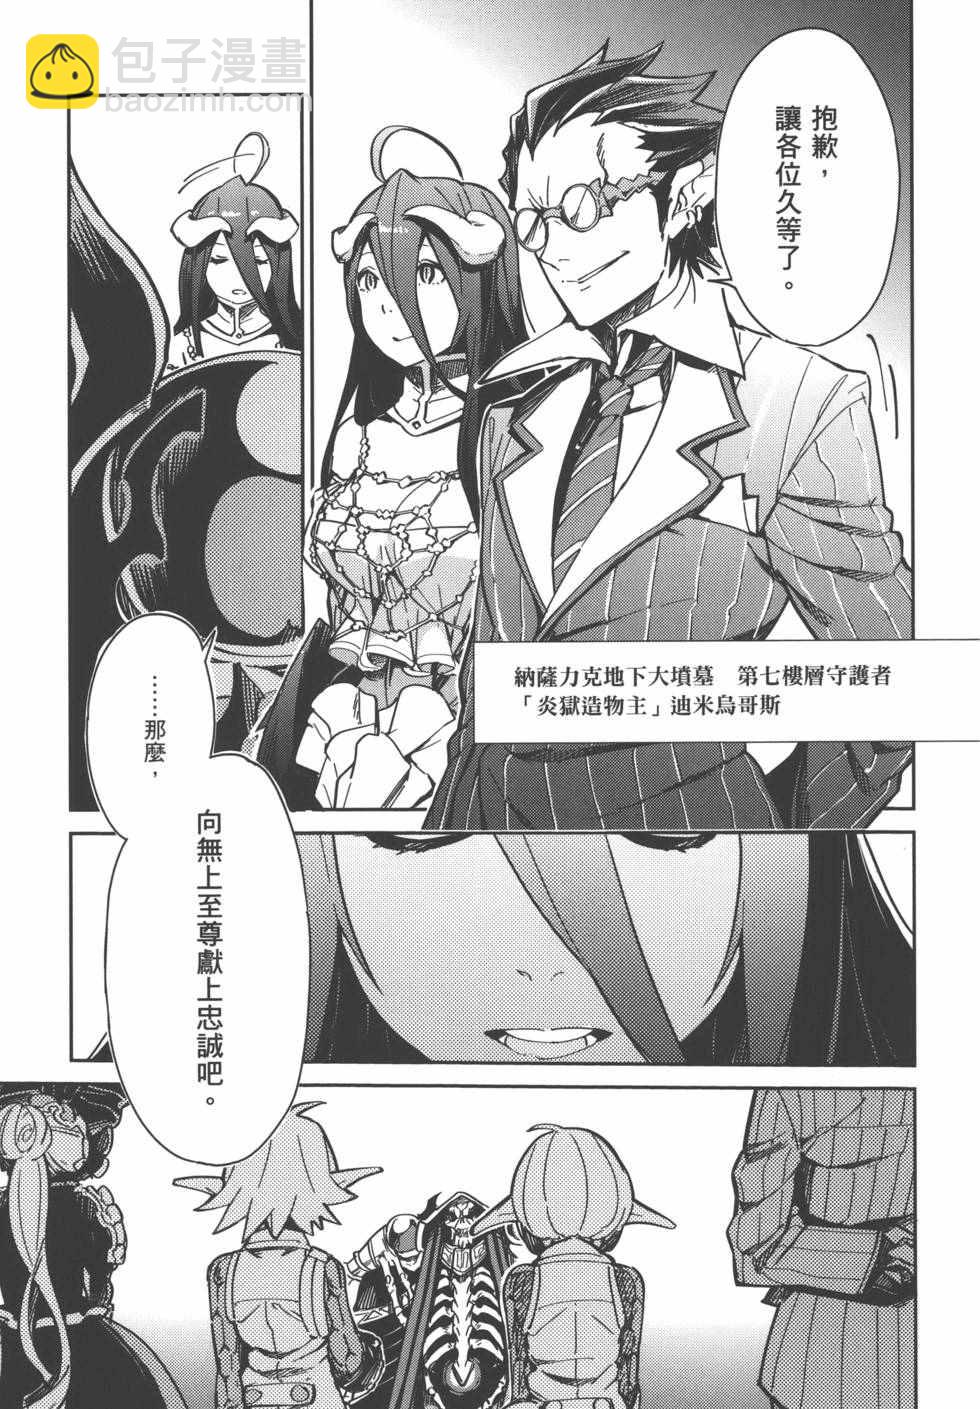 OVERLORD - 第1卷(2/4) - 7